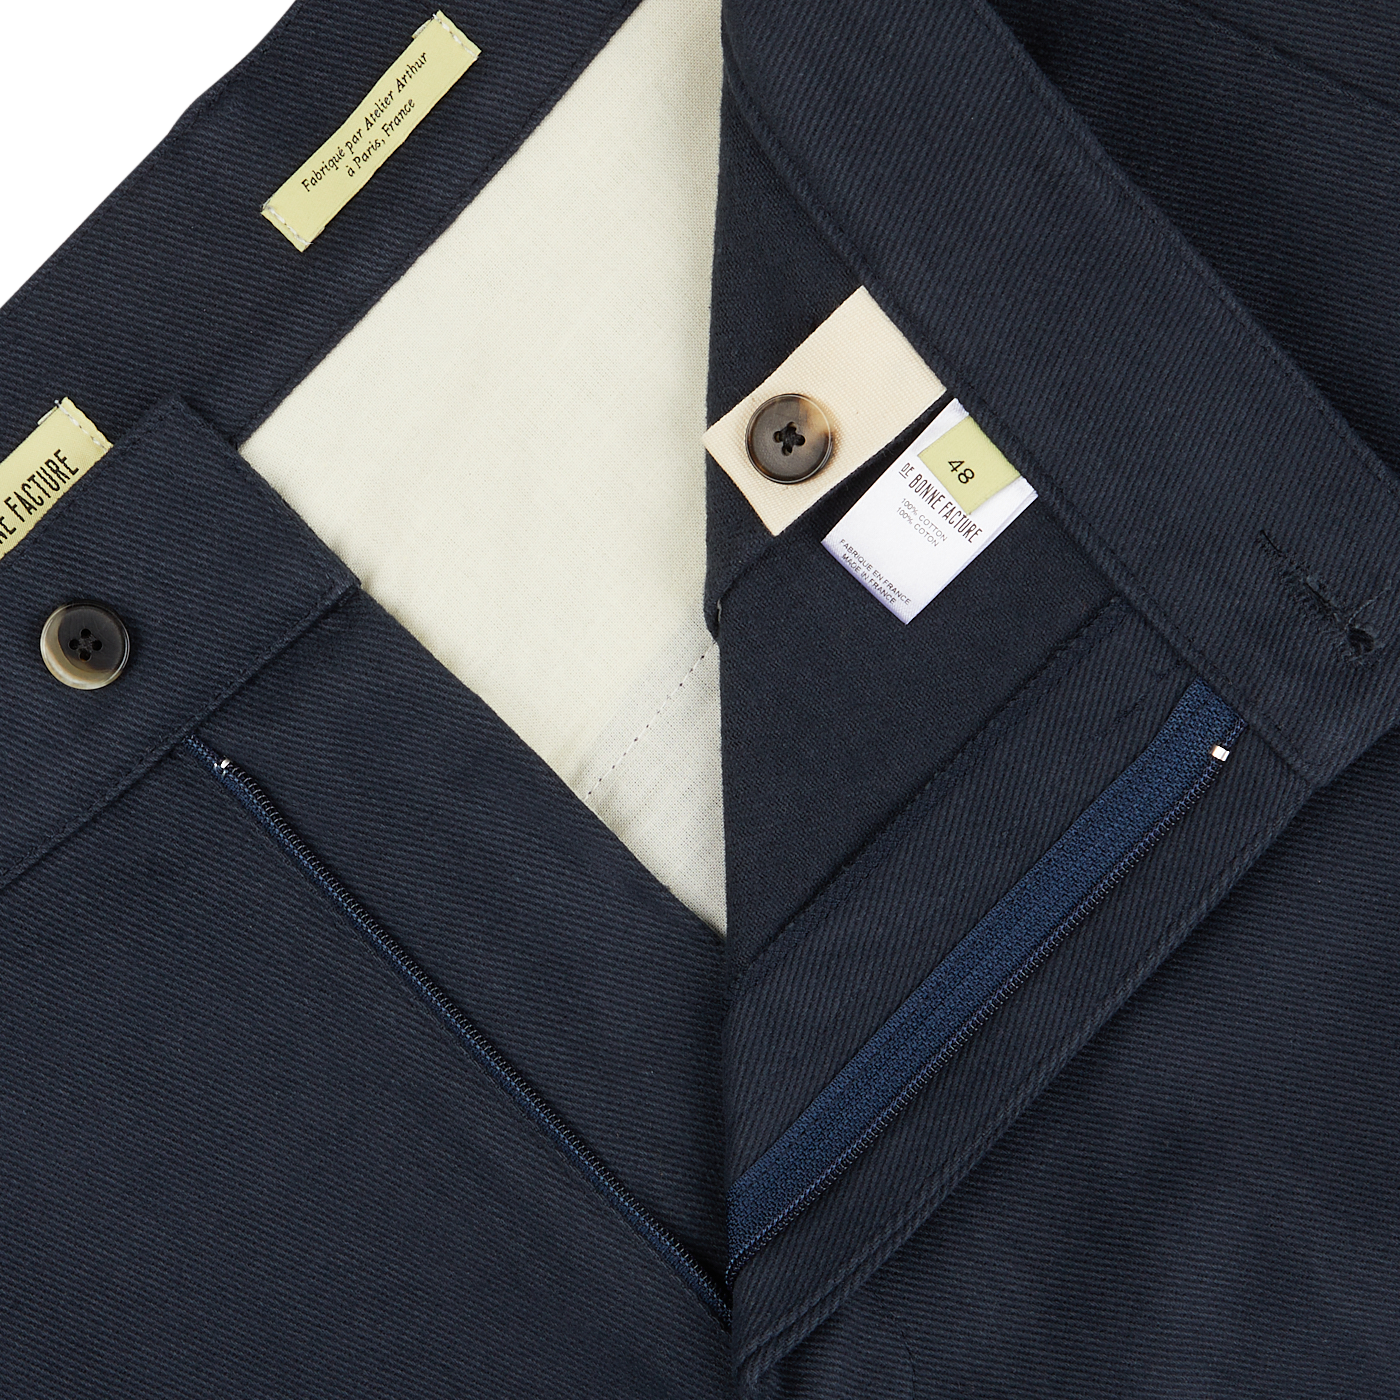 Close-up of De Bonne Facture navy blue men's coat made of heavy cotton drill fabric, with detailed labels and a button visible on the collar.